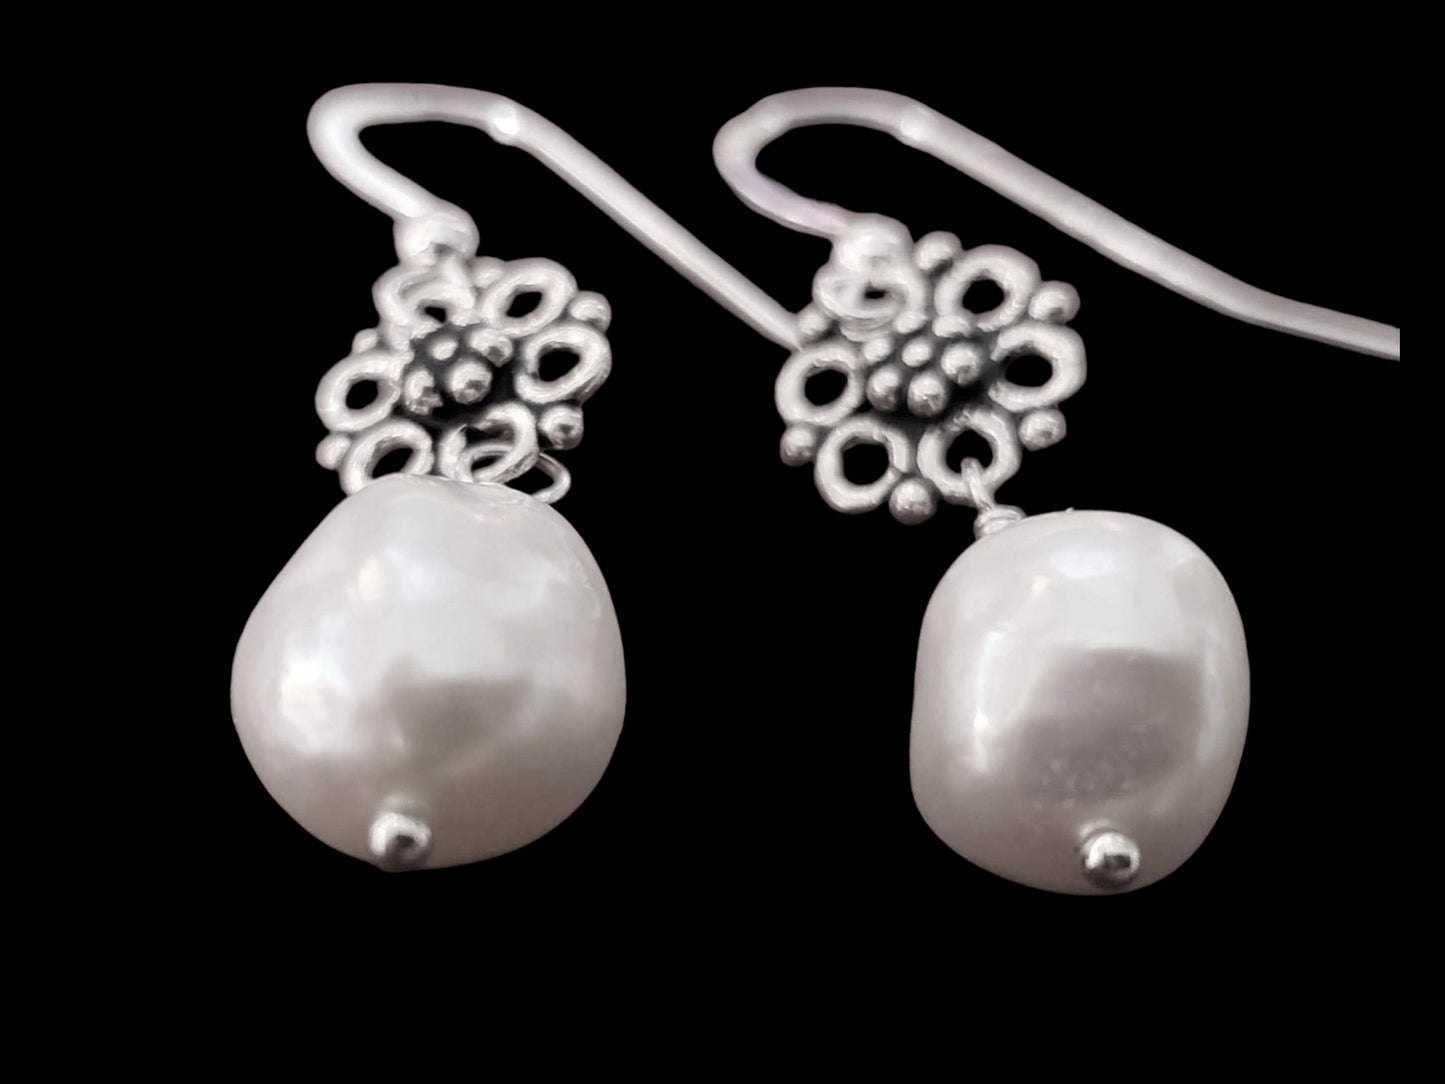 Large White Baroque Pearl Earrings wire wrapped to two decorative, antiqued Sterling Silver floral design pendants.